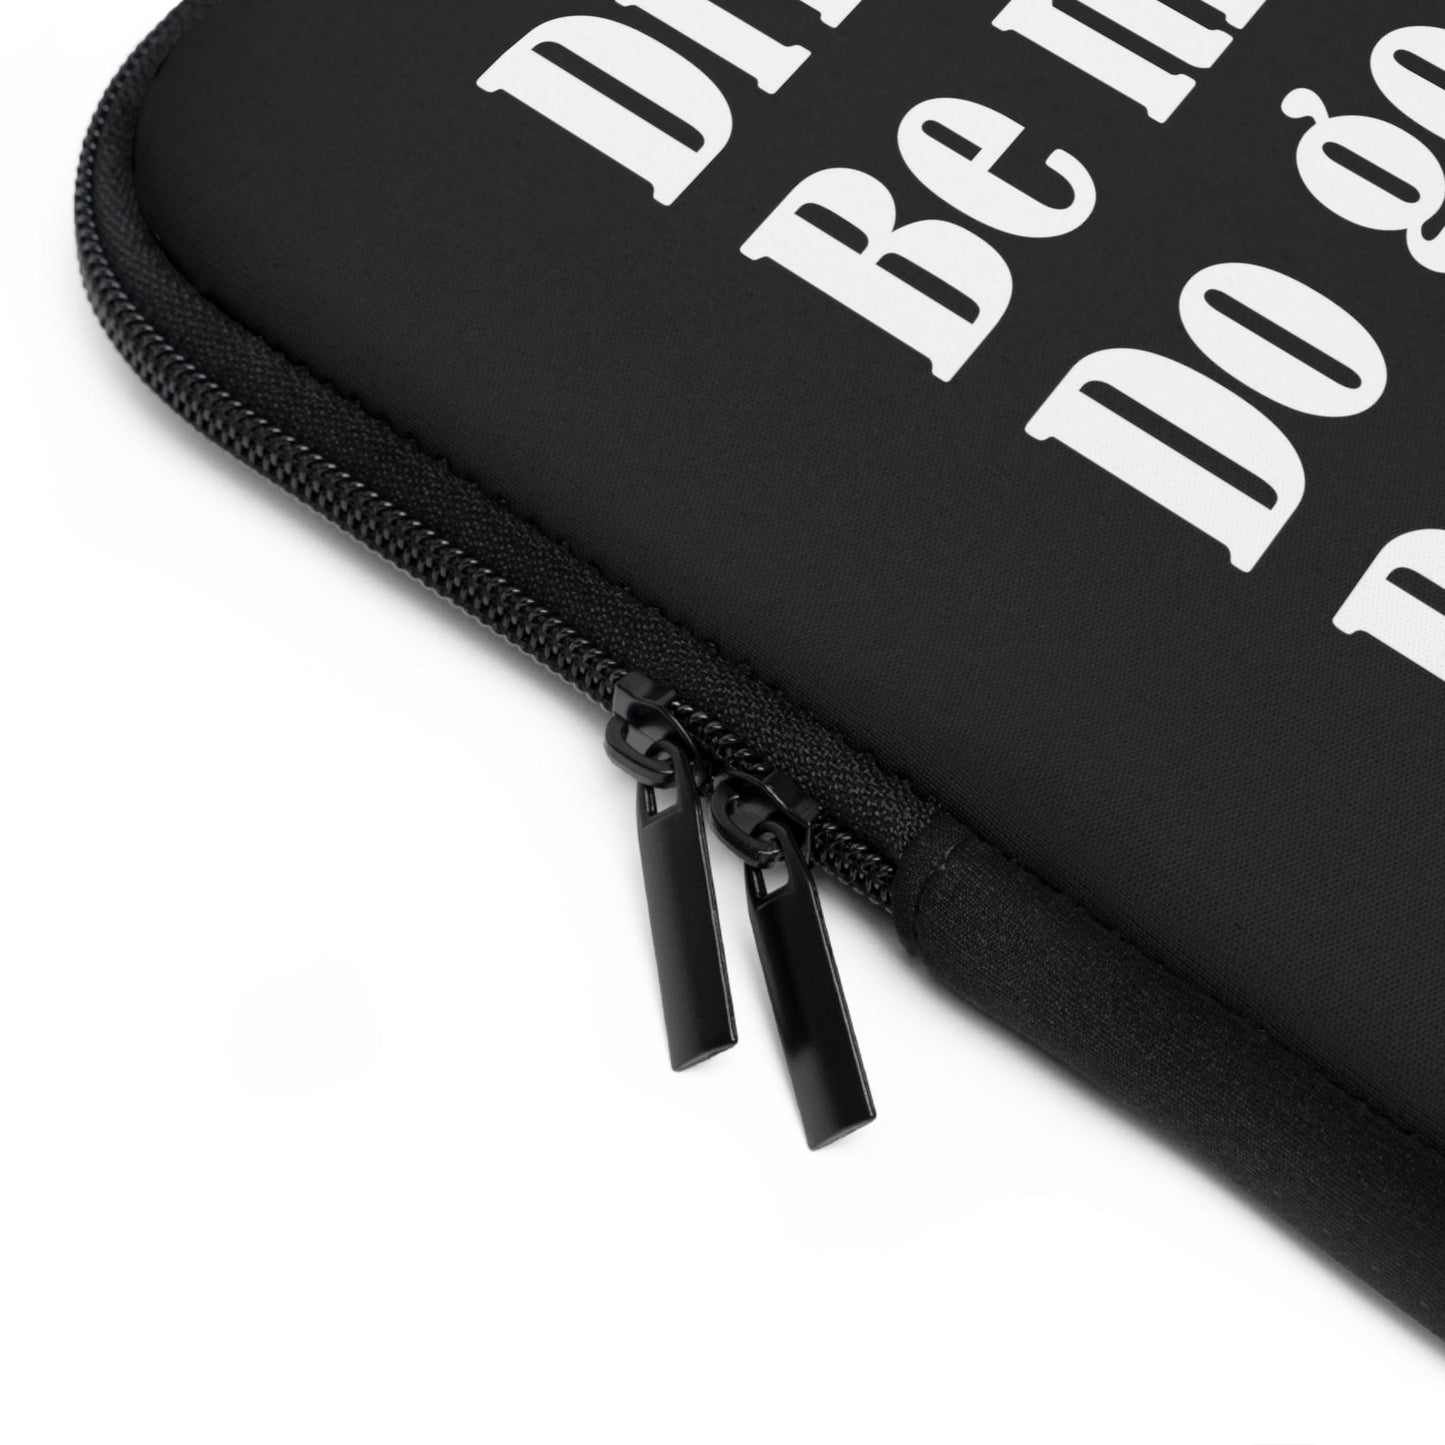 Good Bean Gifts "Drink Coffee, Be Nice, Do Good, Repeat" Laptop Sleeve